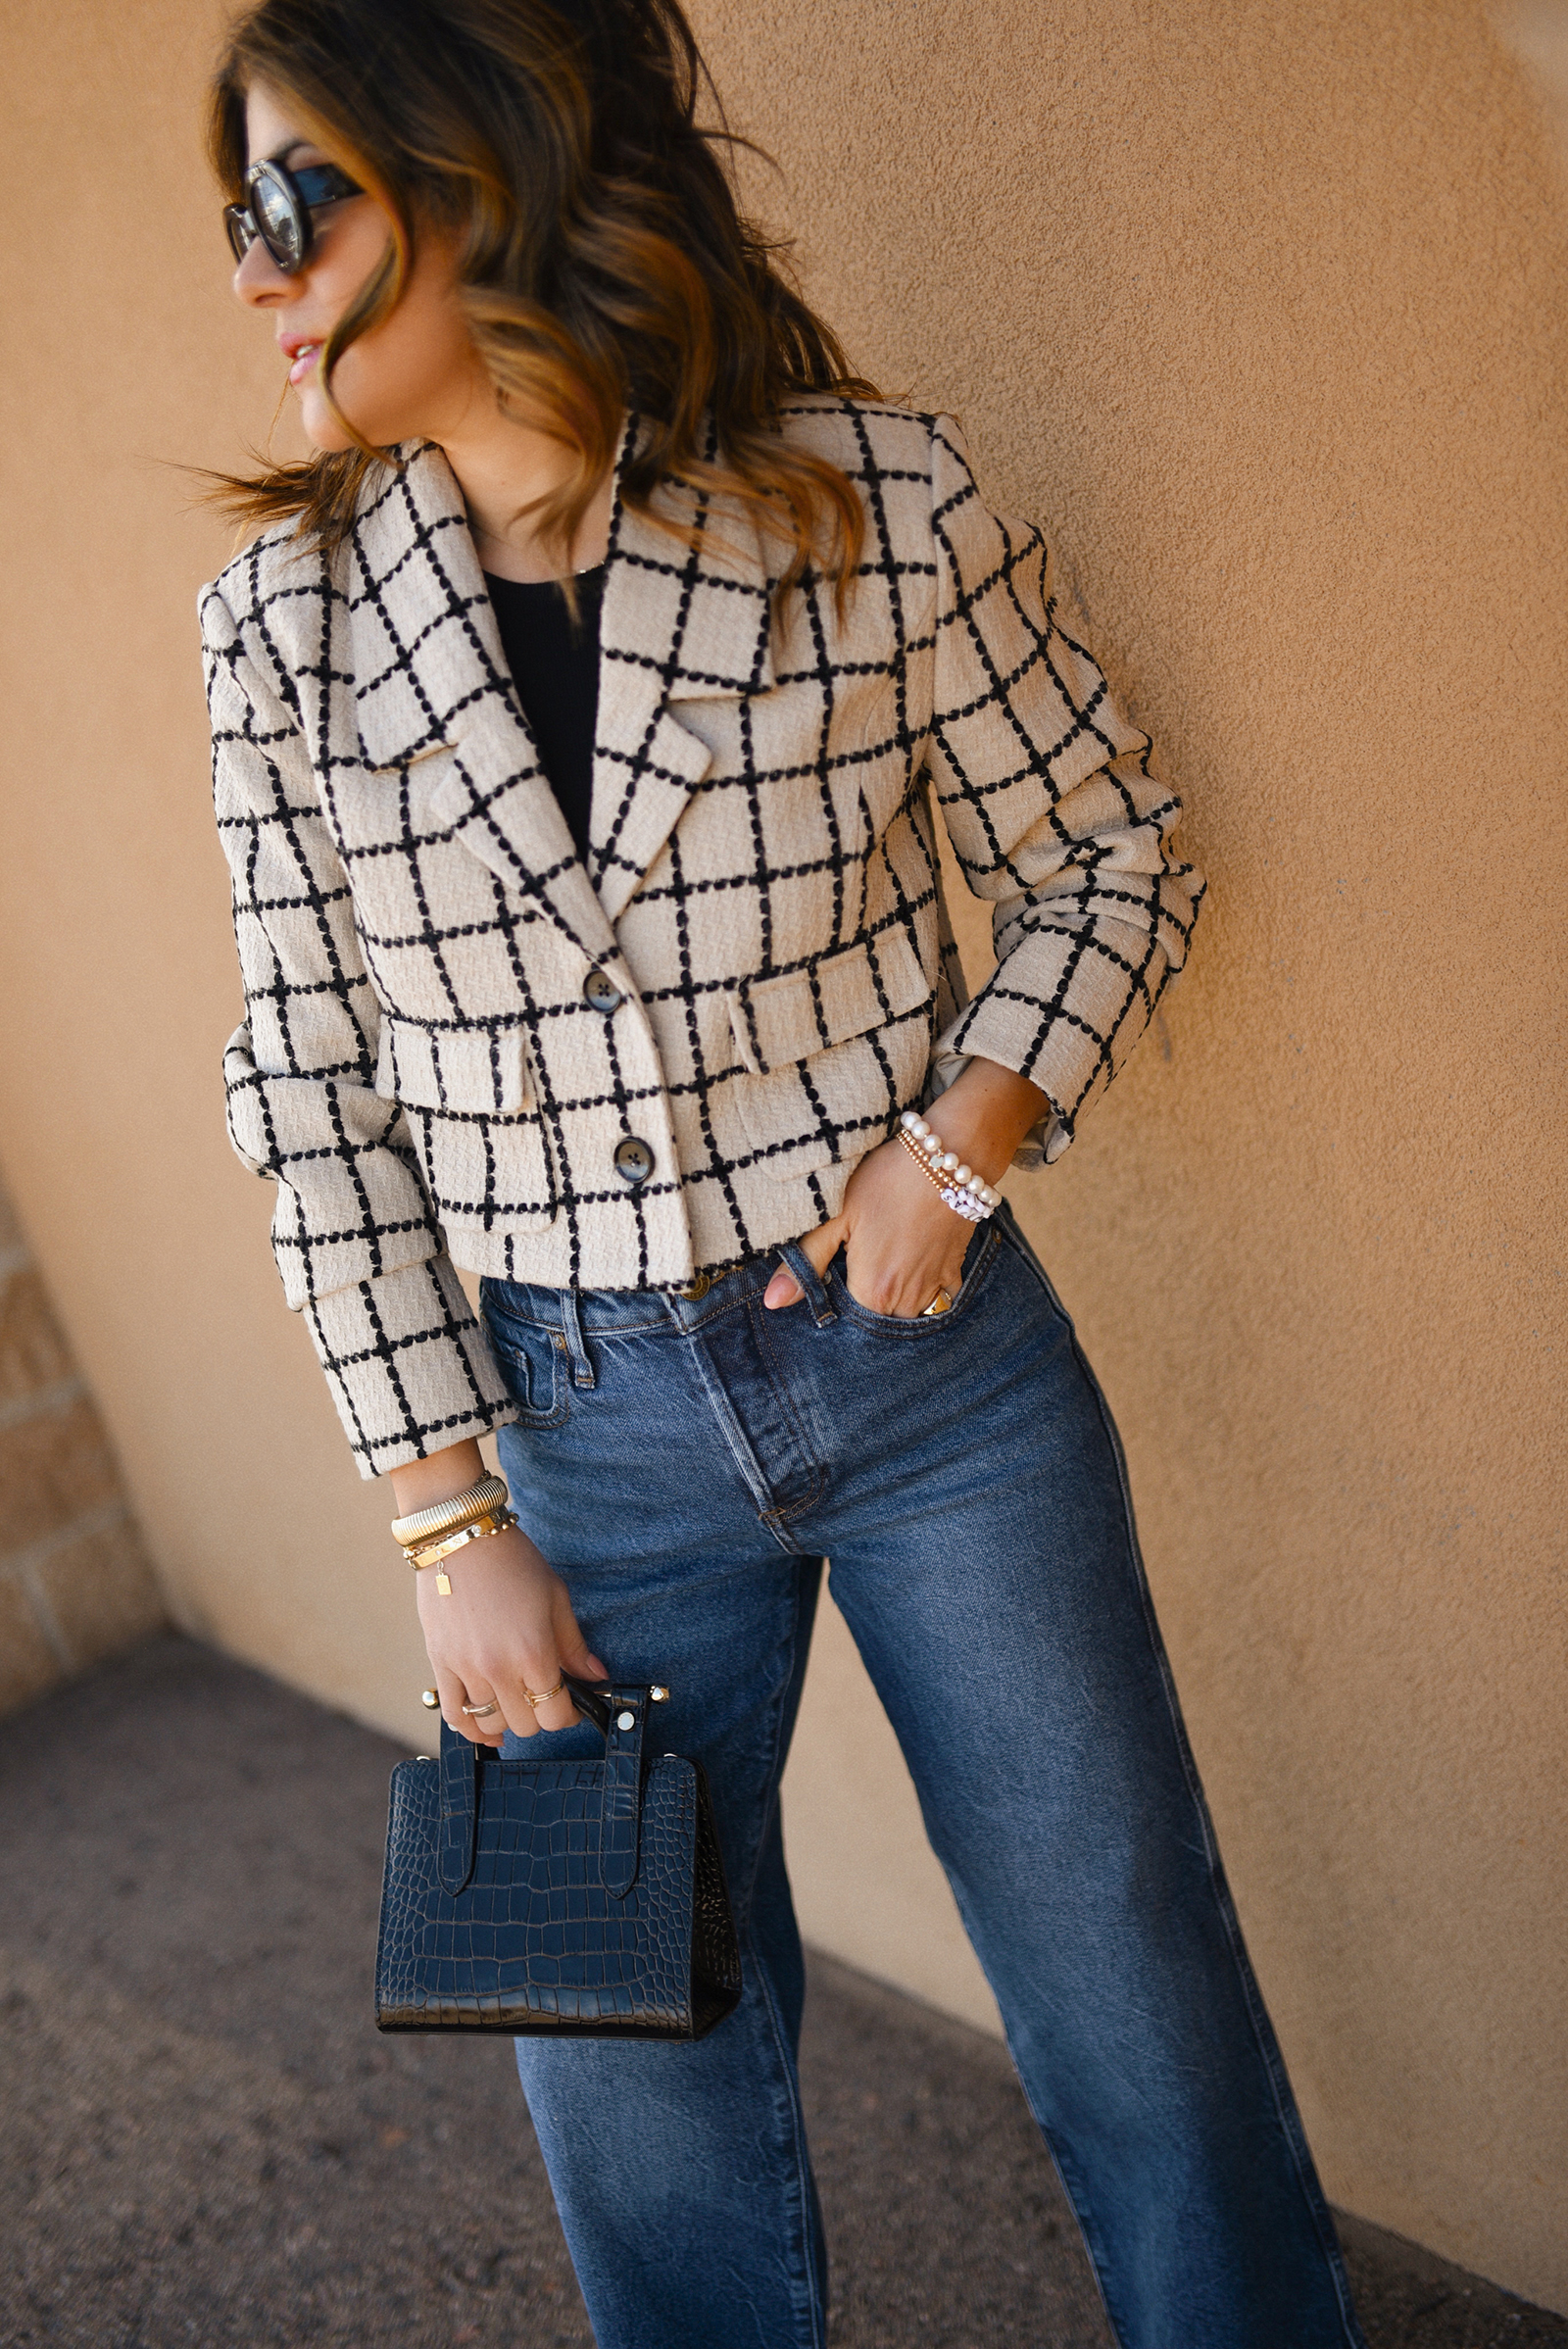 Carolina Hellal of Chic Talk wearing a plaid cropped blazer via Shopbop, Express jeans, Strathberry Leather Tote and Celine sunglasses